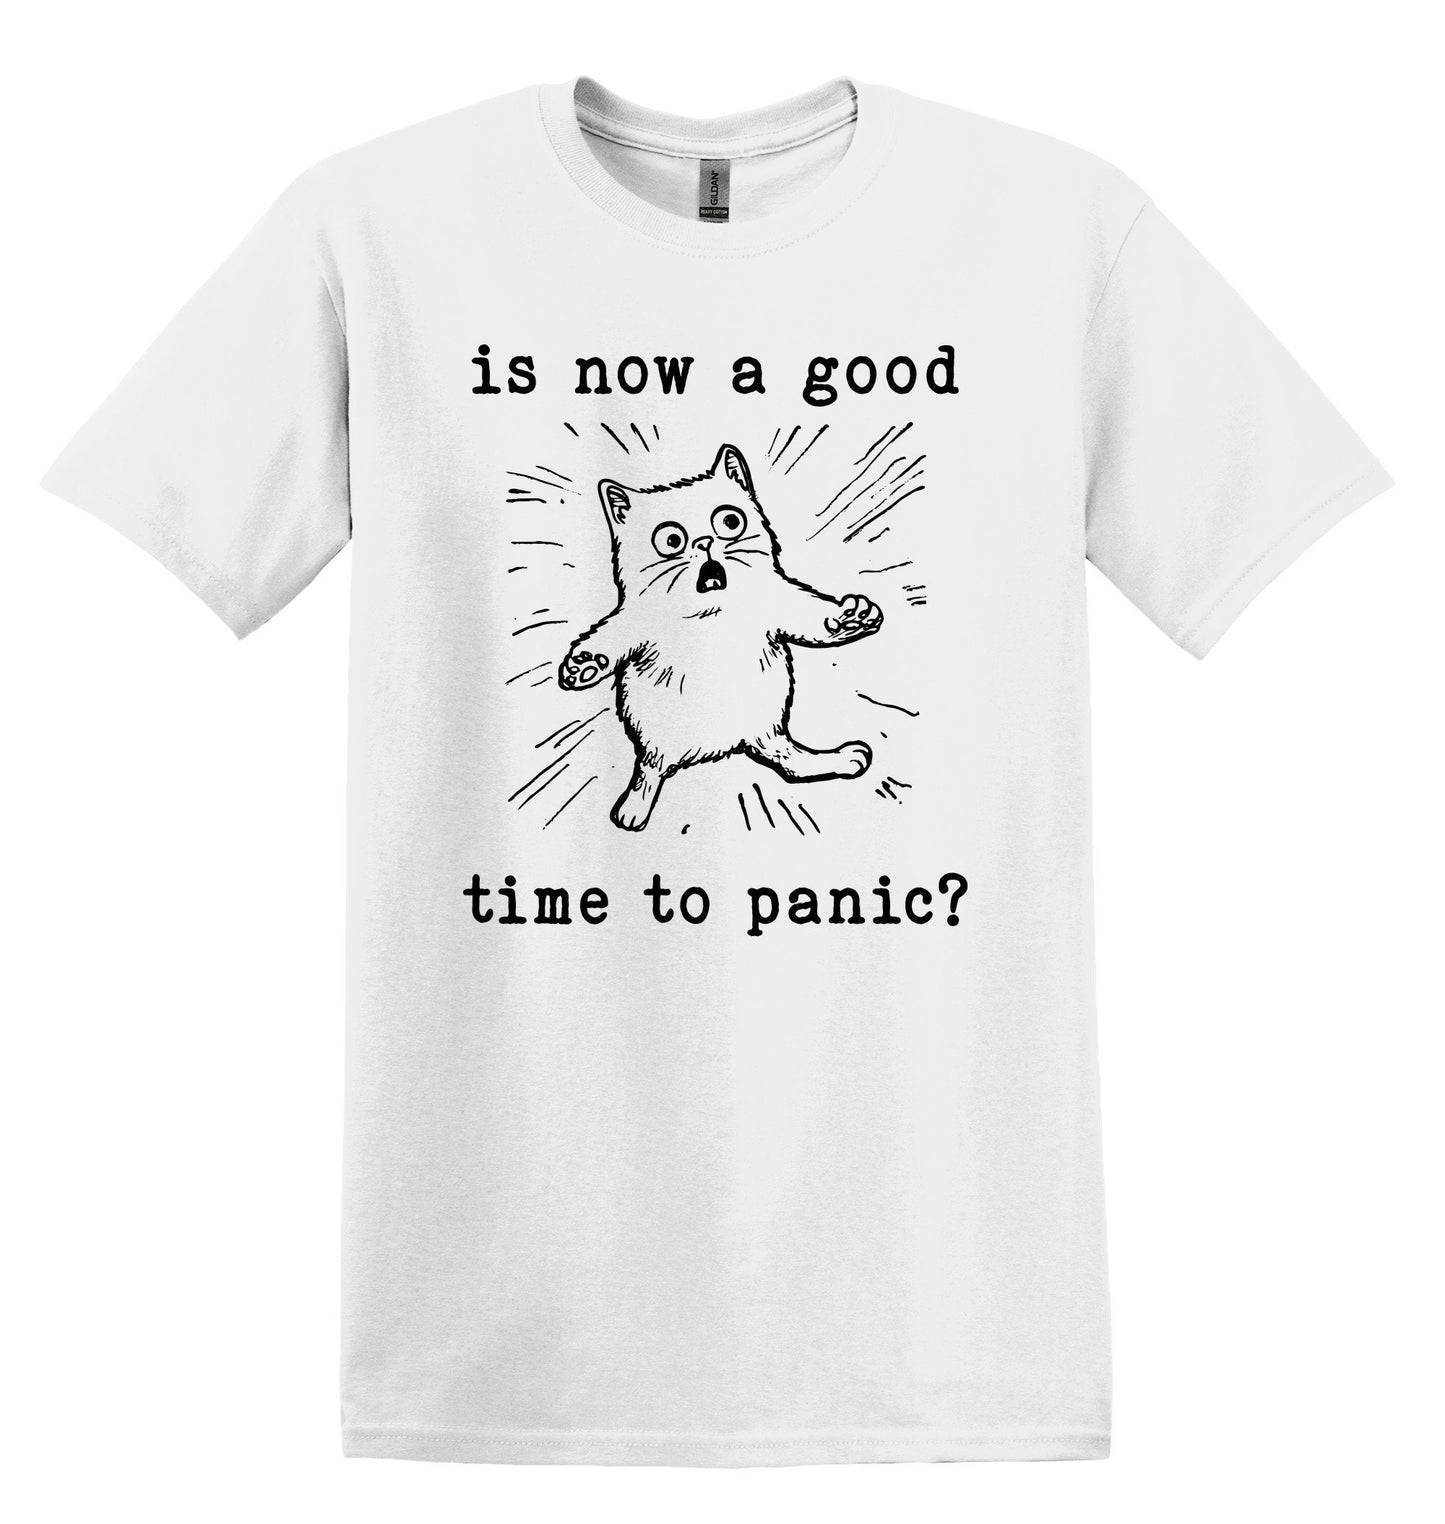 Is Now a Good Time To Panic Cat T-shirt Graphic Shirt Funny Adult TShirt Vintage Funny TShirt Nostalgia T-Shirt Relaxed Cotton Tee T-Shirt